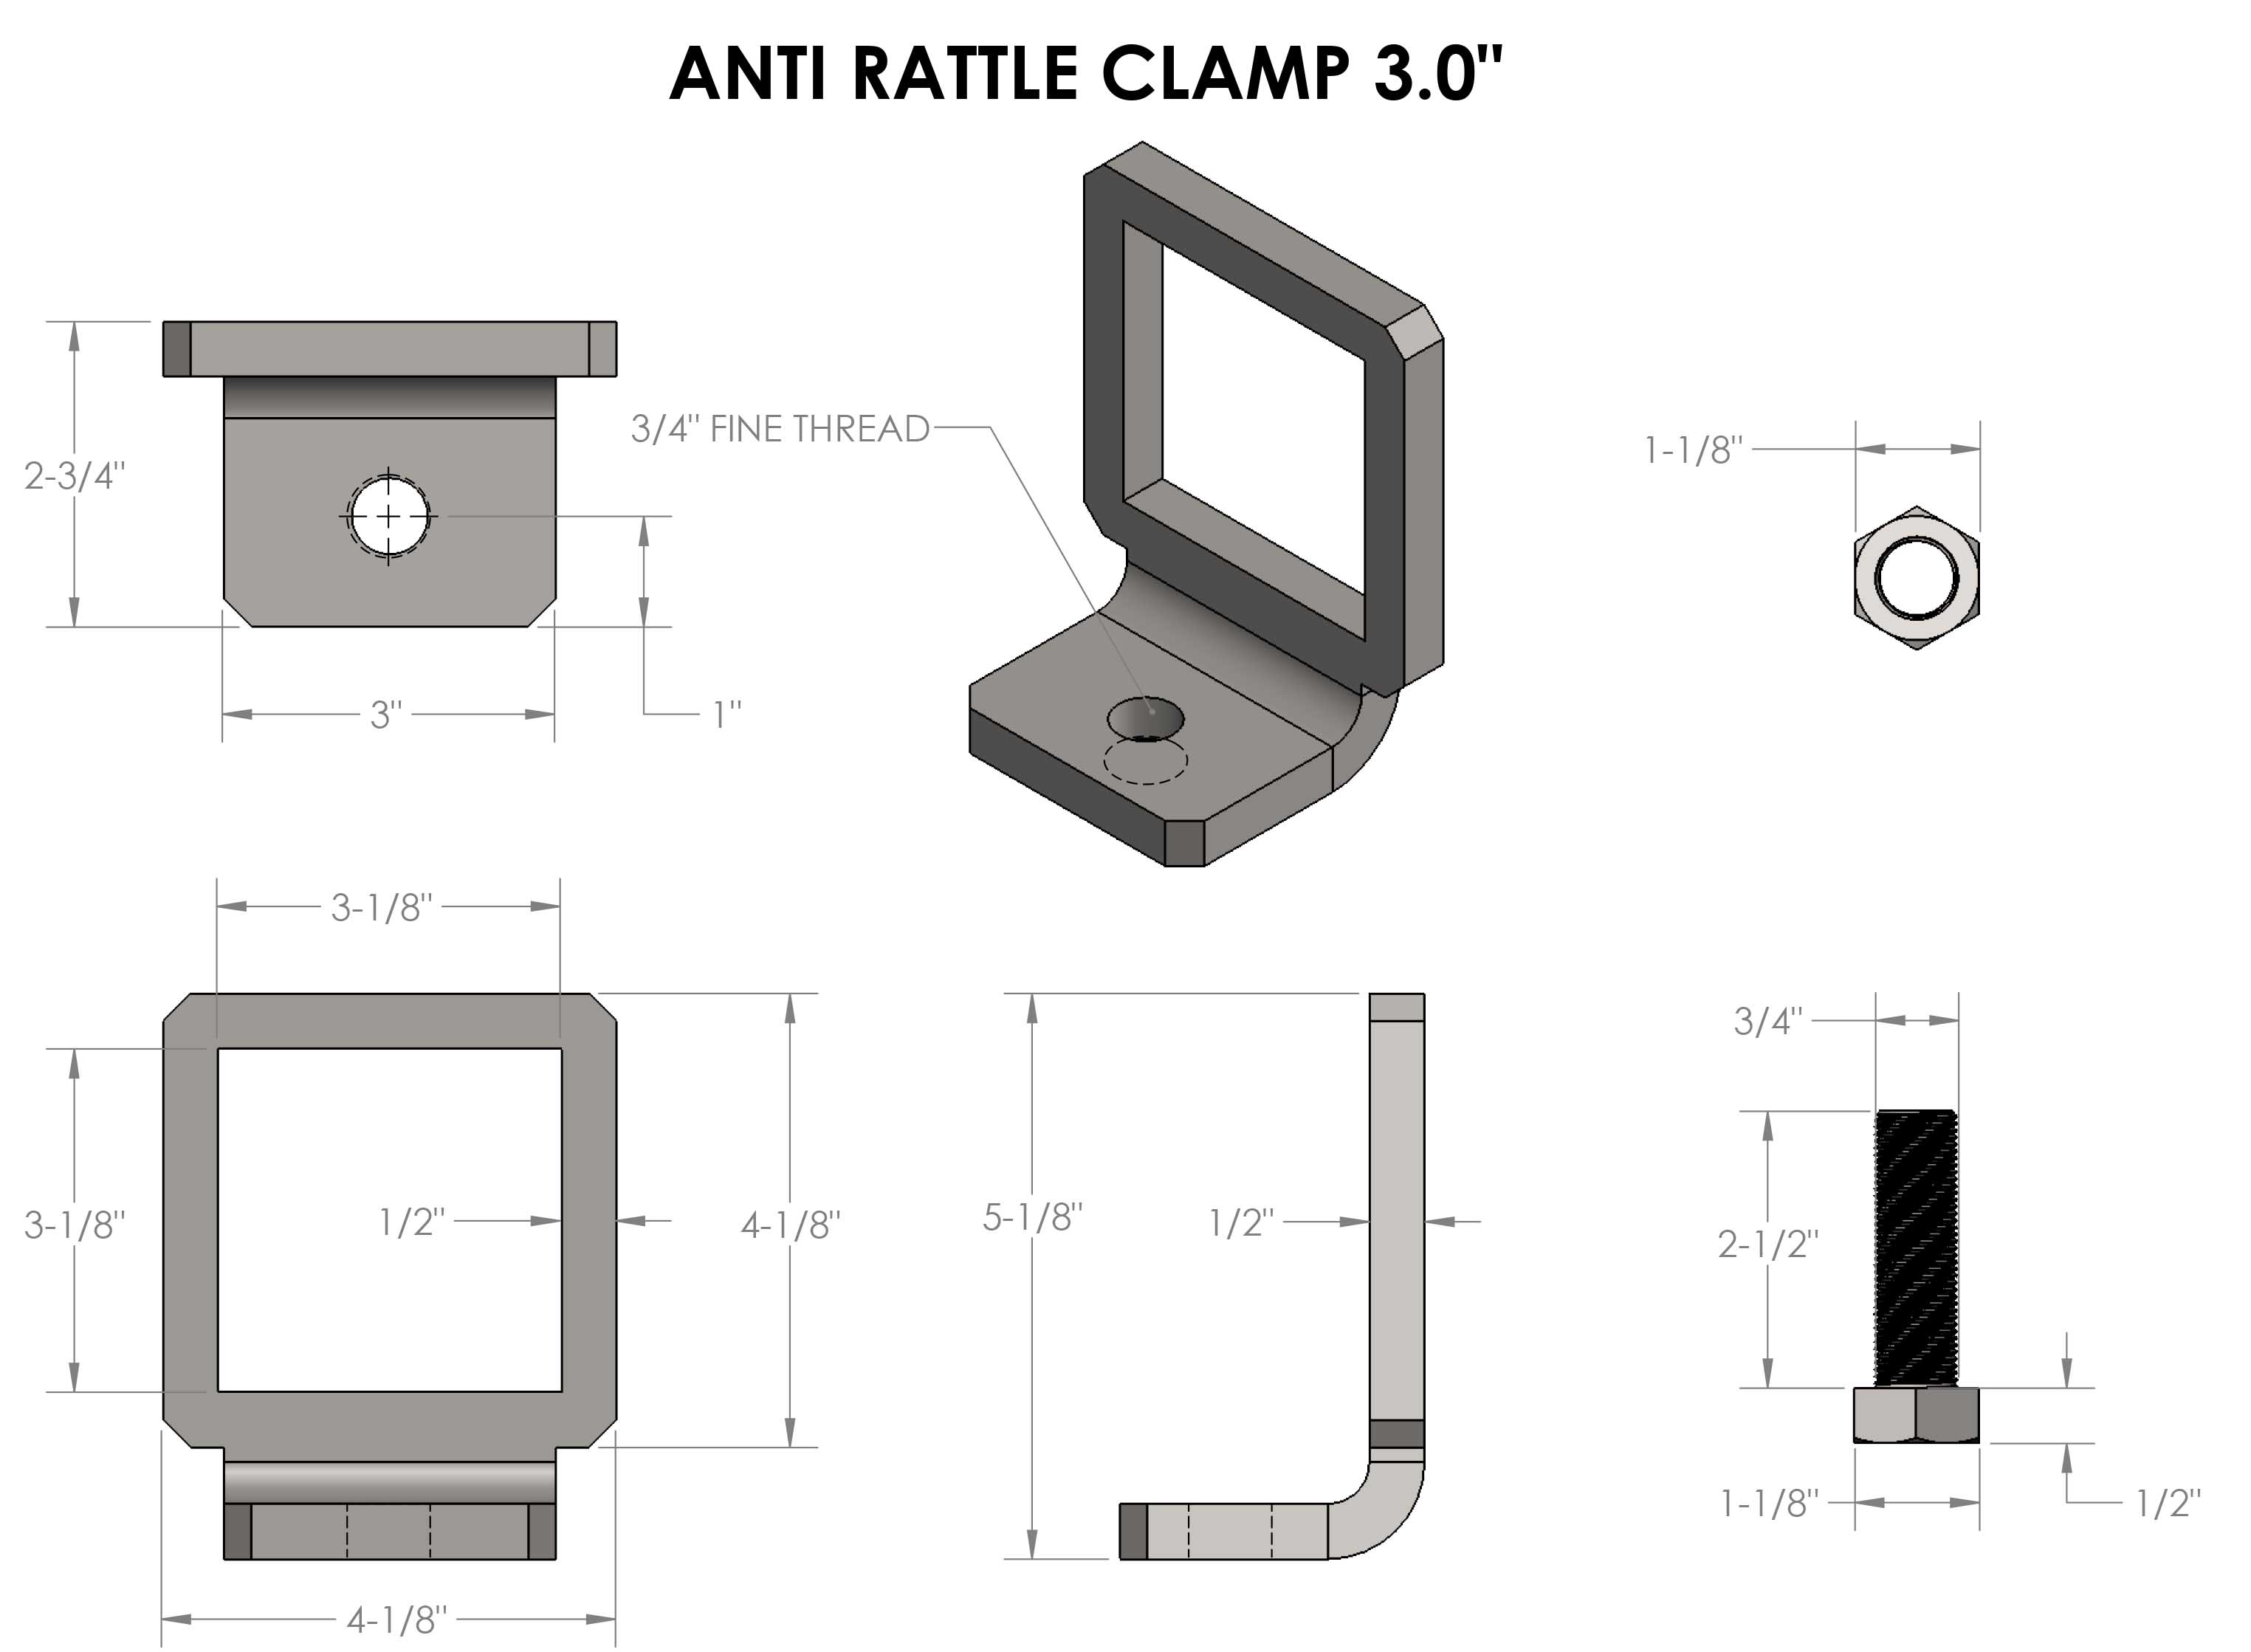 3.0" BulletProof Anti-Rattle Clamp Design Specification